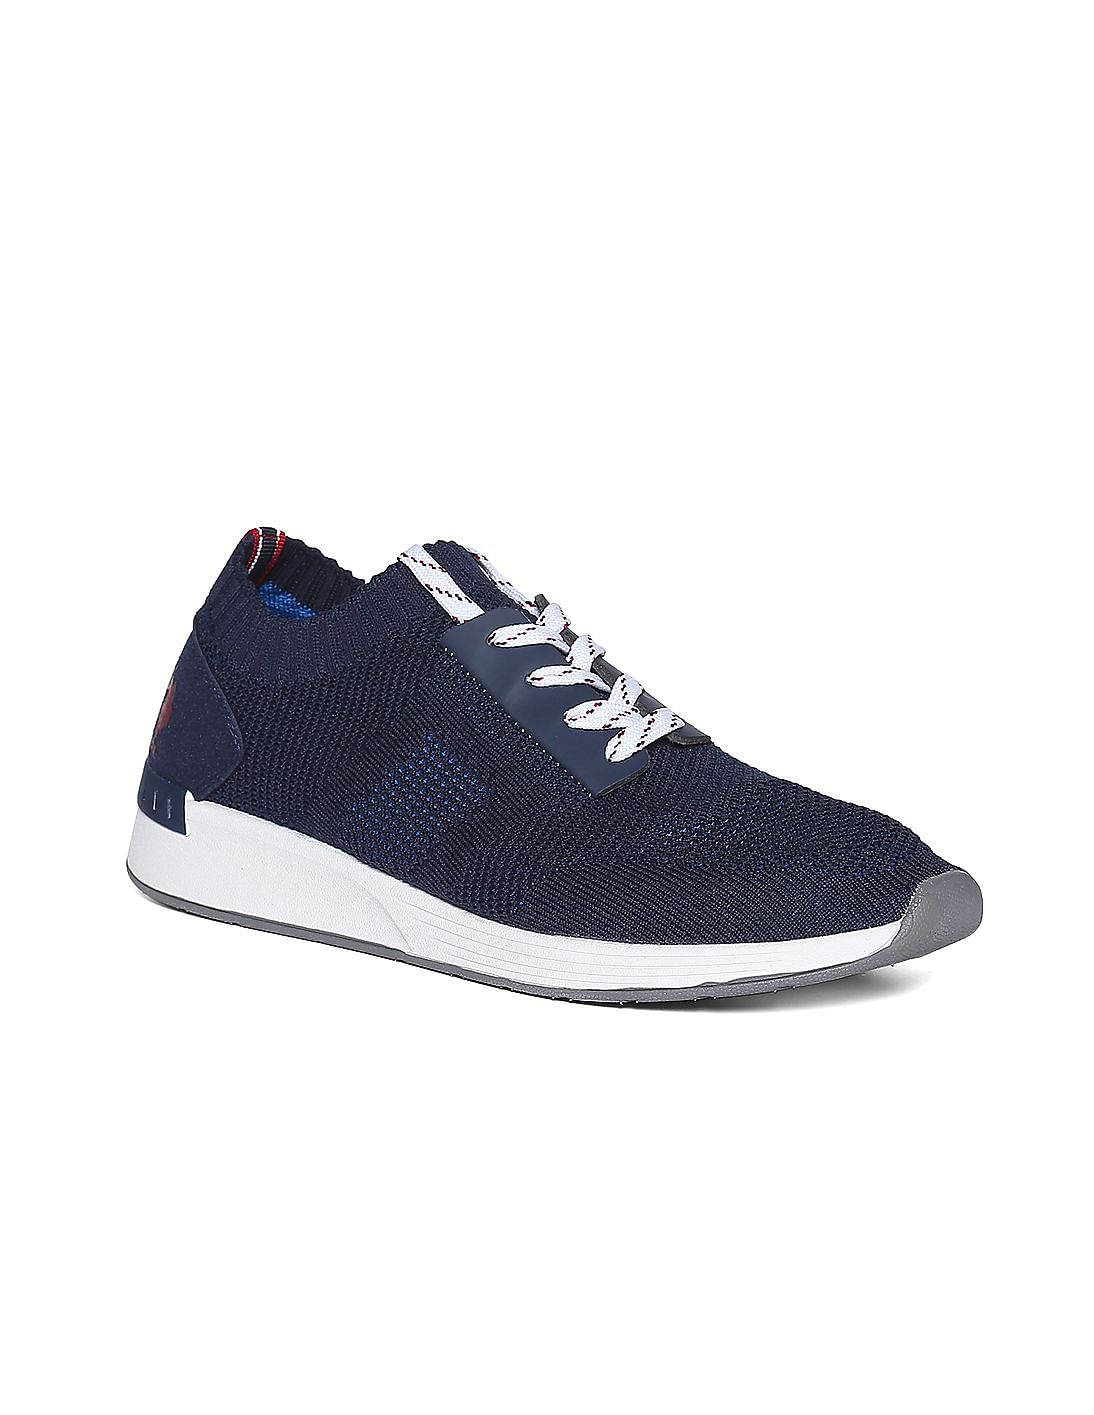 Buy U.S. Polo Assn. Men Knit Lace Up Tortugas Sneakers - NNNOW.com